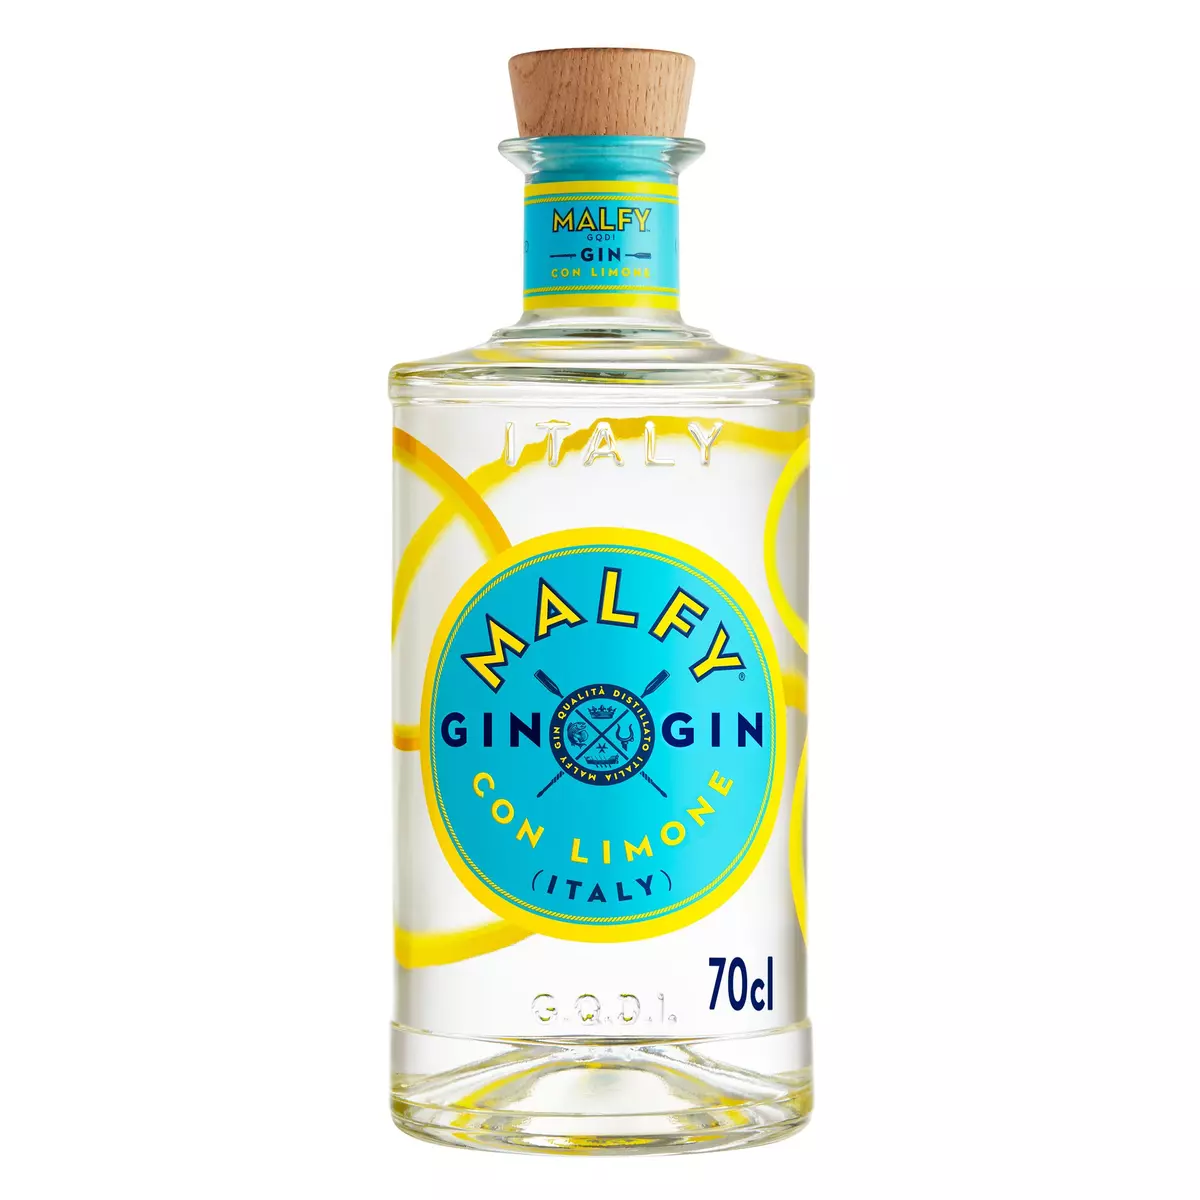 MALFY Gin italien Limone 41% 70cl